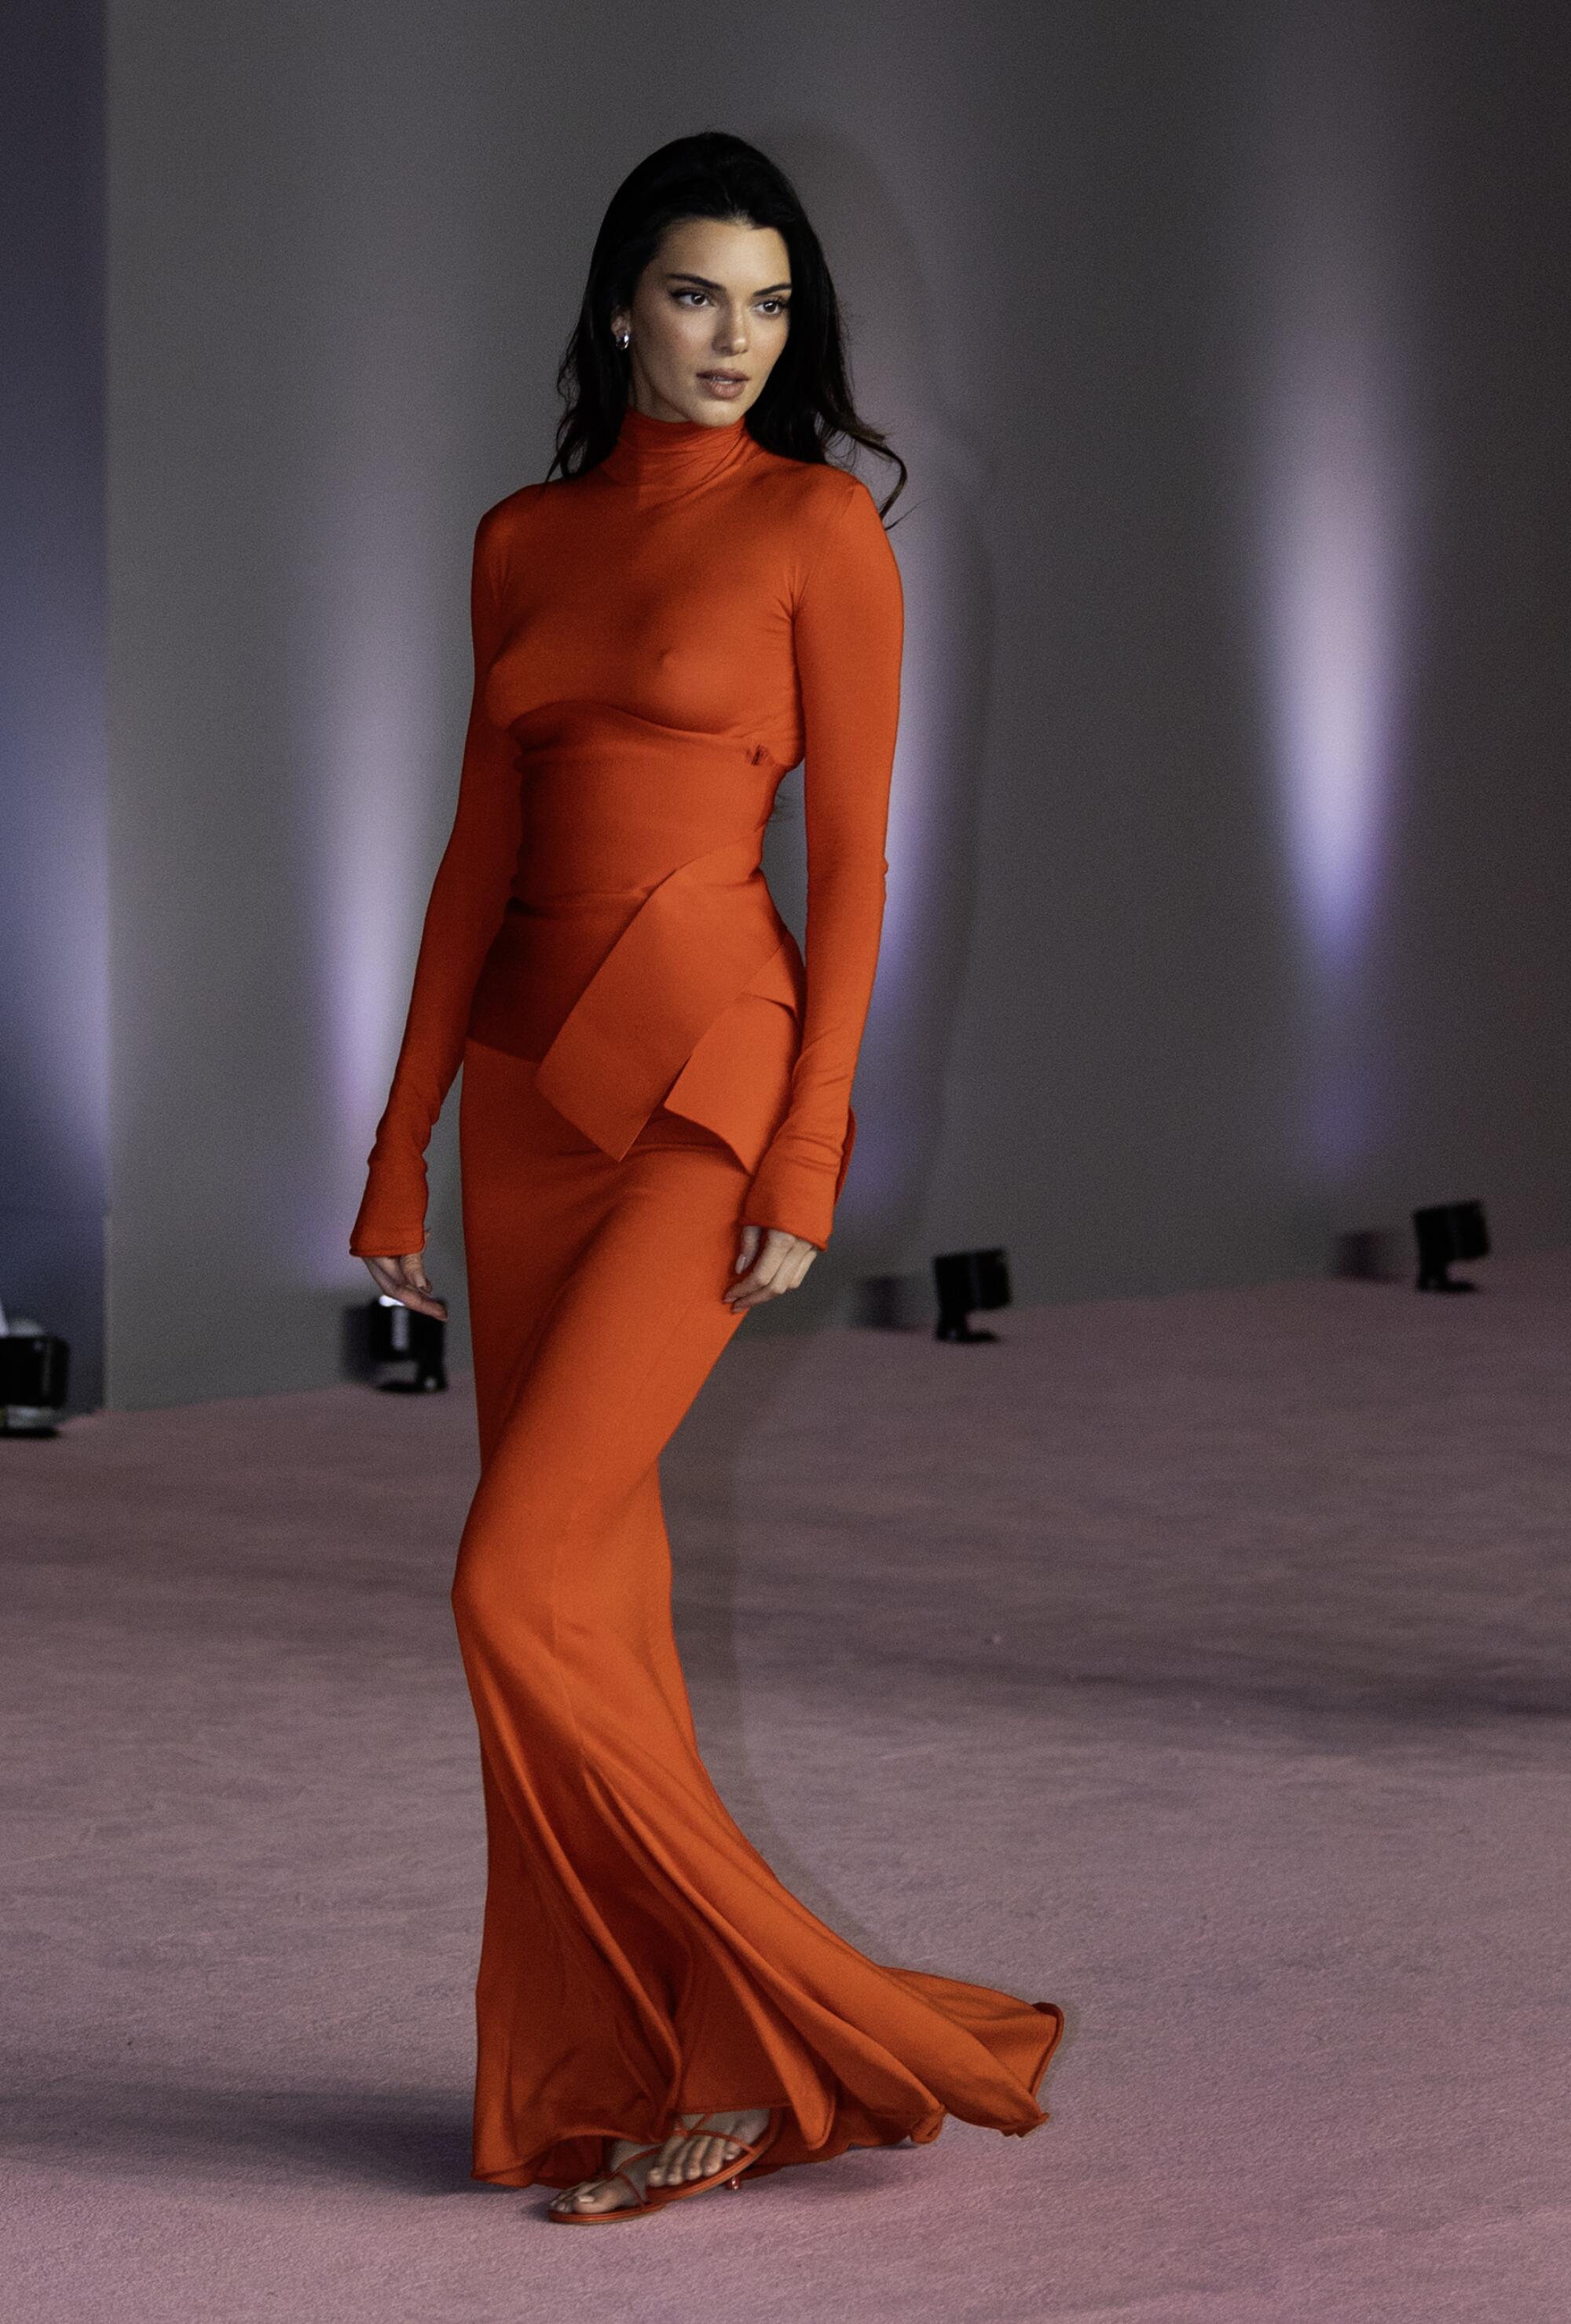 Kendall Jenner attends the 3rd Annual Academy Museum Gala at Academy Museum 